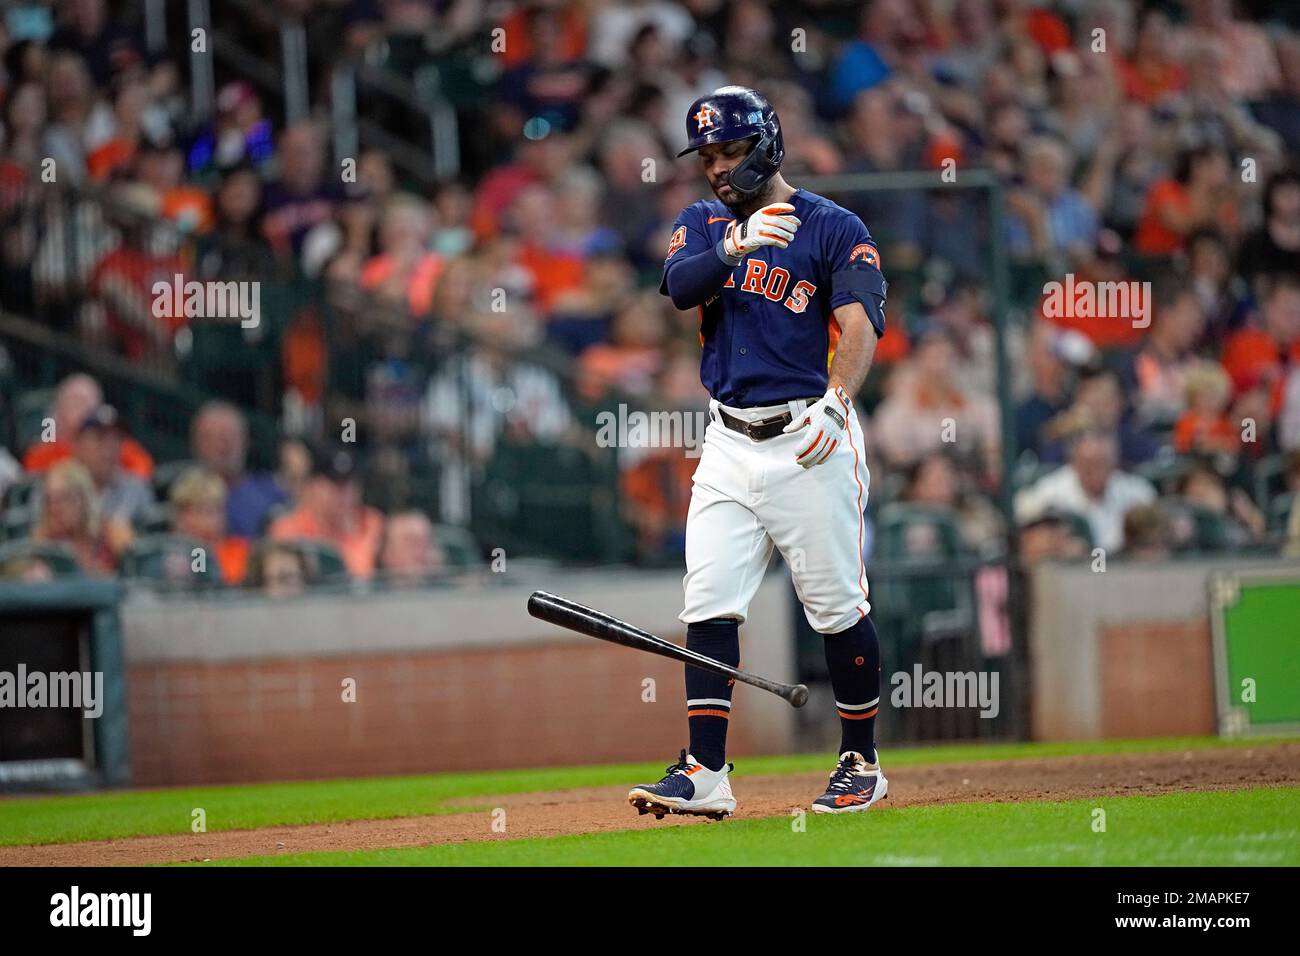 Houston Astros' Jose Altuve tosses his bat after called out on